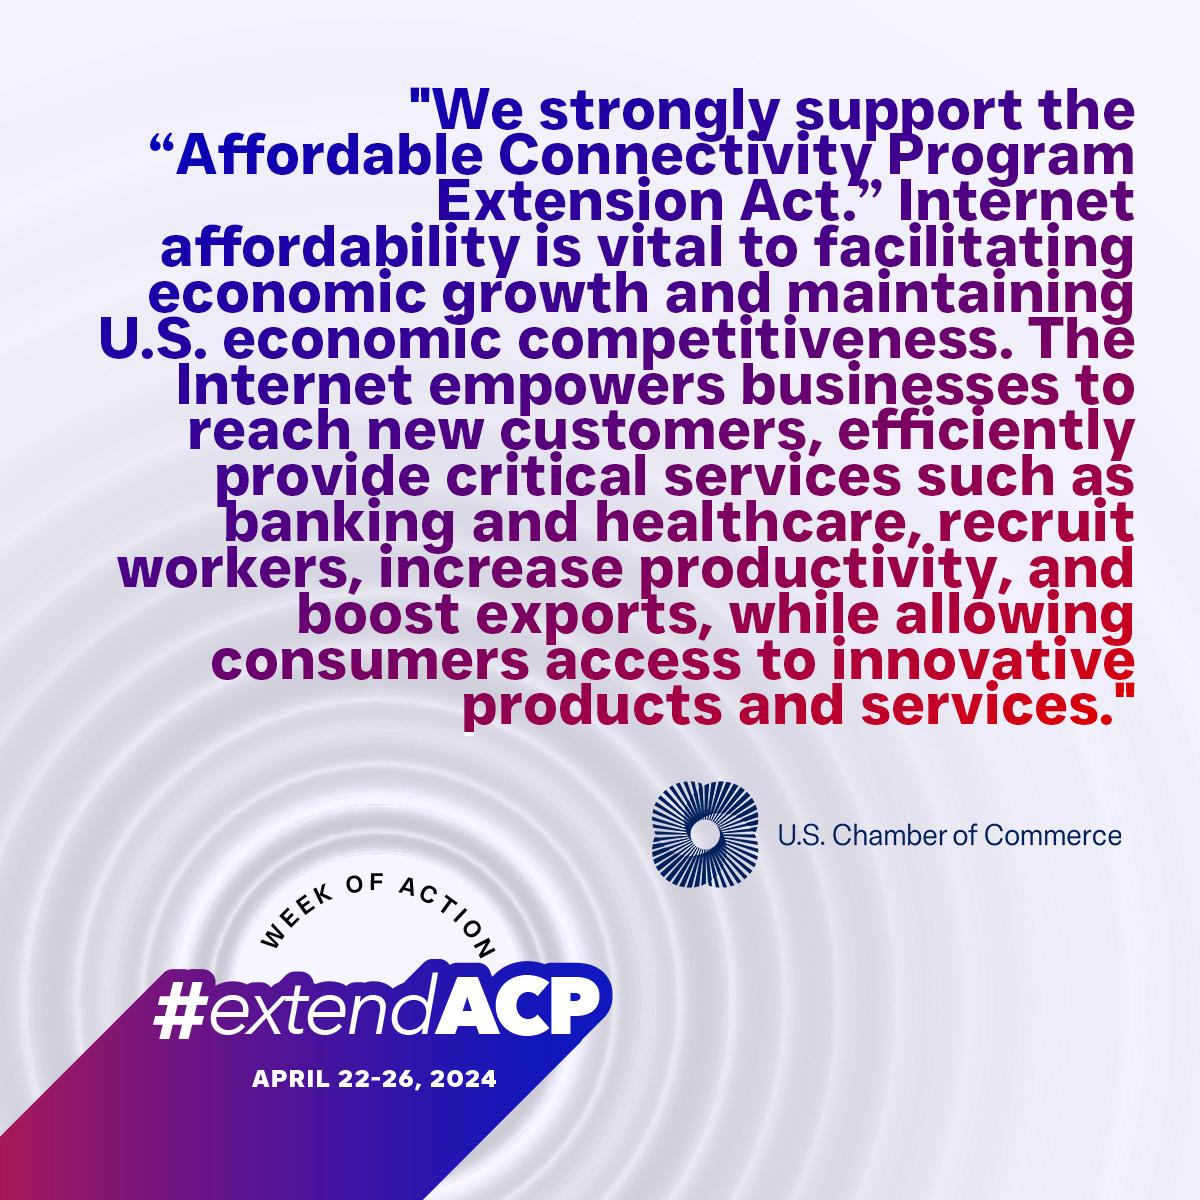 Not only has the Affordable Connectivity Program proven itself to be a practical investment delivering long term dividends in every sector, research has shown that higher levels of broadband adoption lead to higher incomes, and lower unemployment. #ExtendACP #ACP